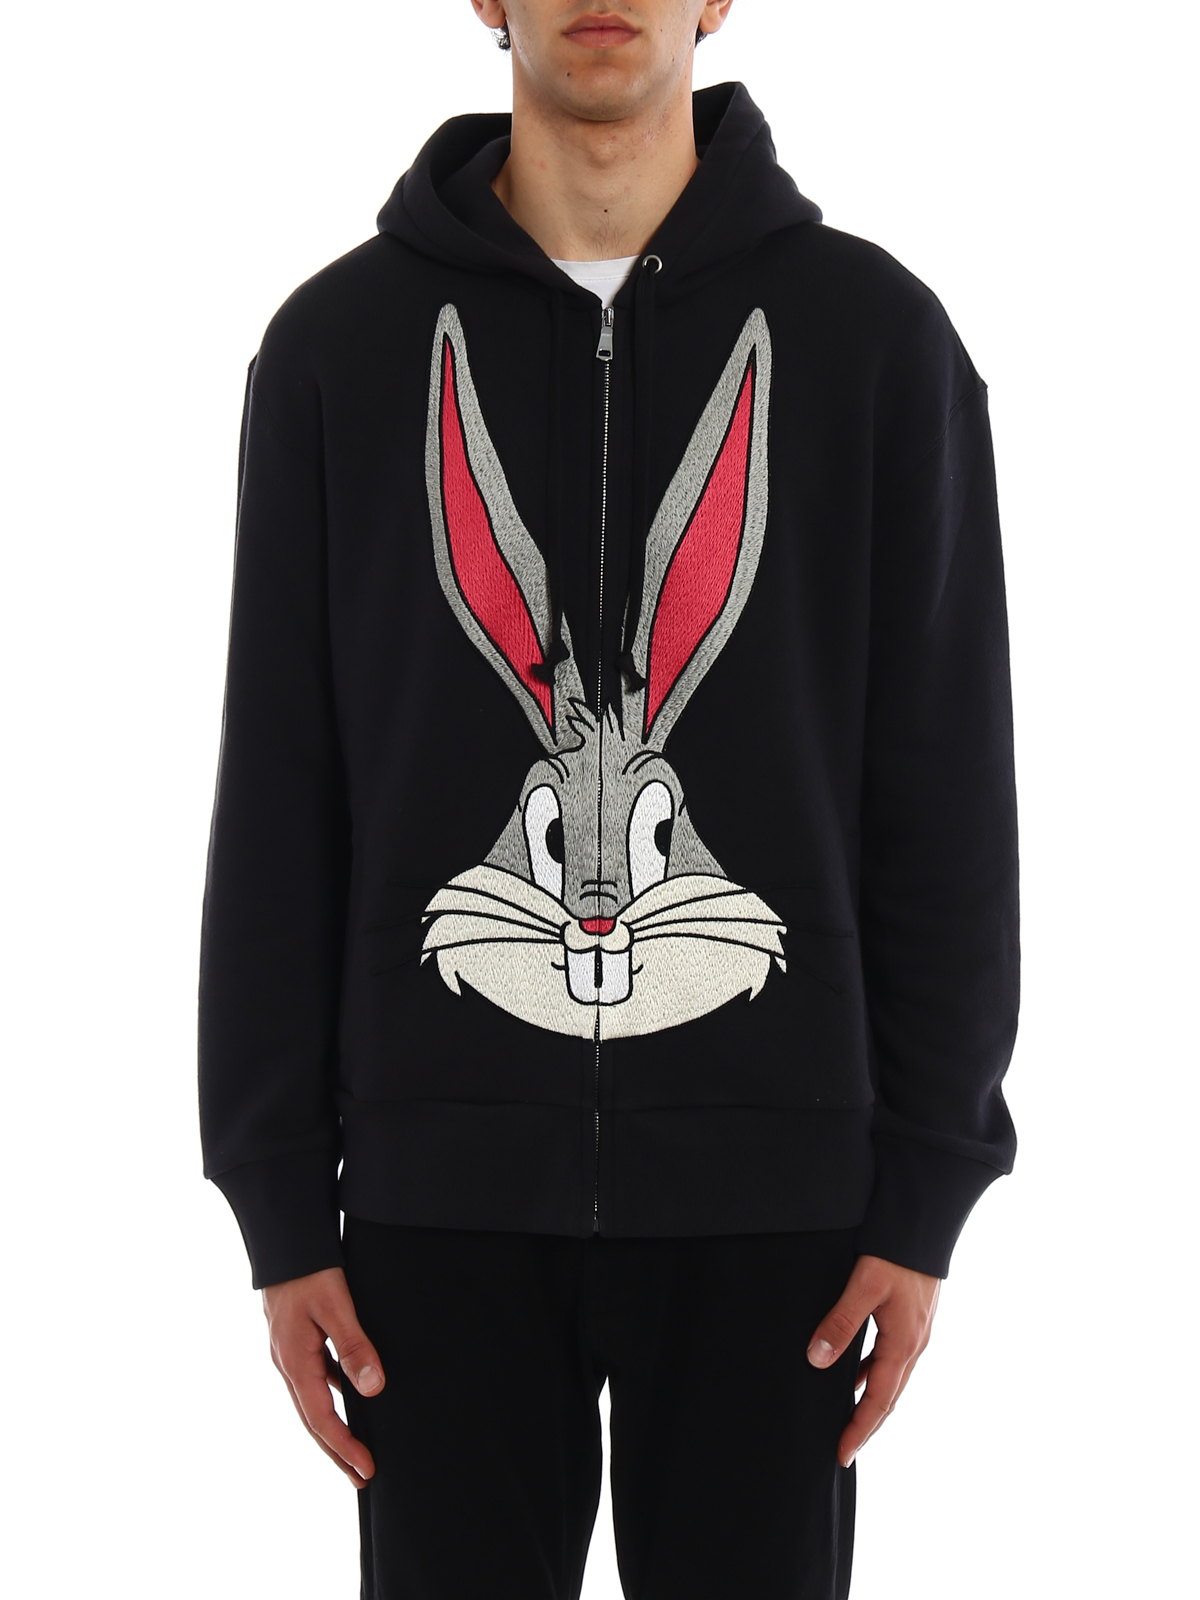 Grondwet Missend helling Sweatshirts & Sweaters Gucci - Bugs Bunny embroidered hoodie -  519489X9S711286